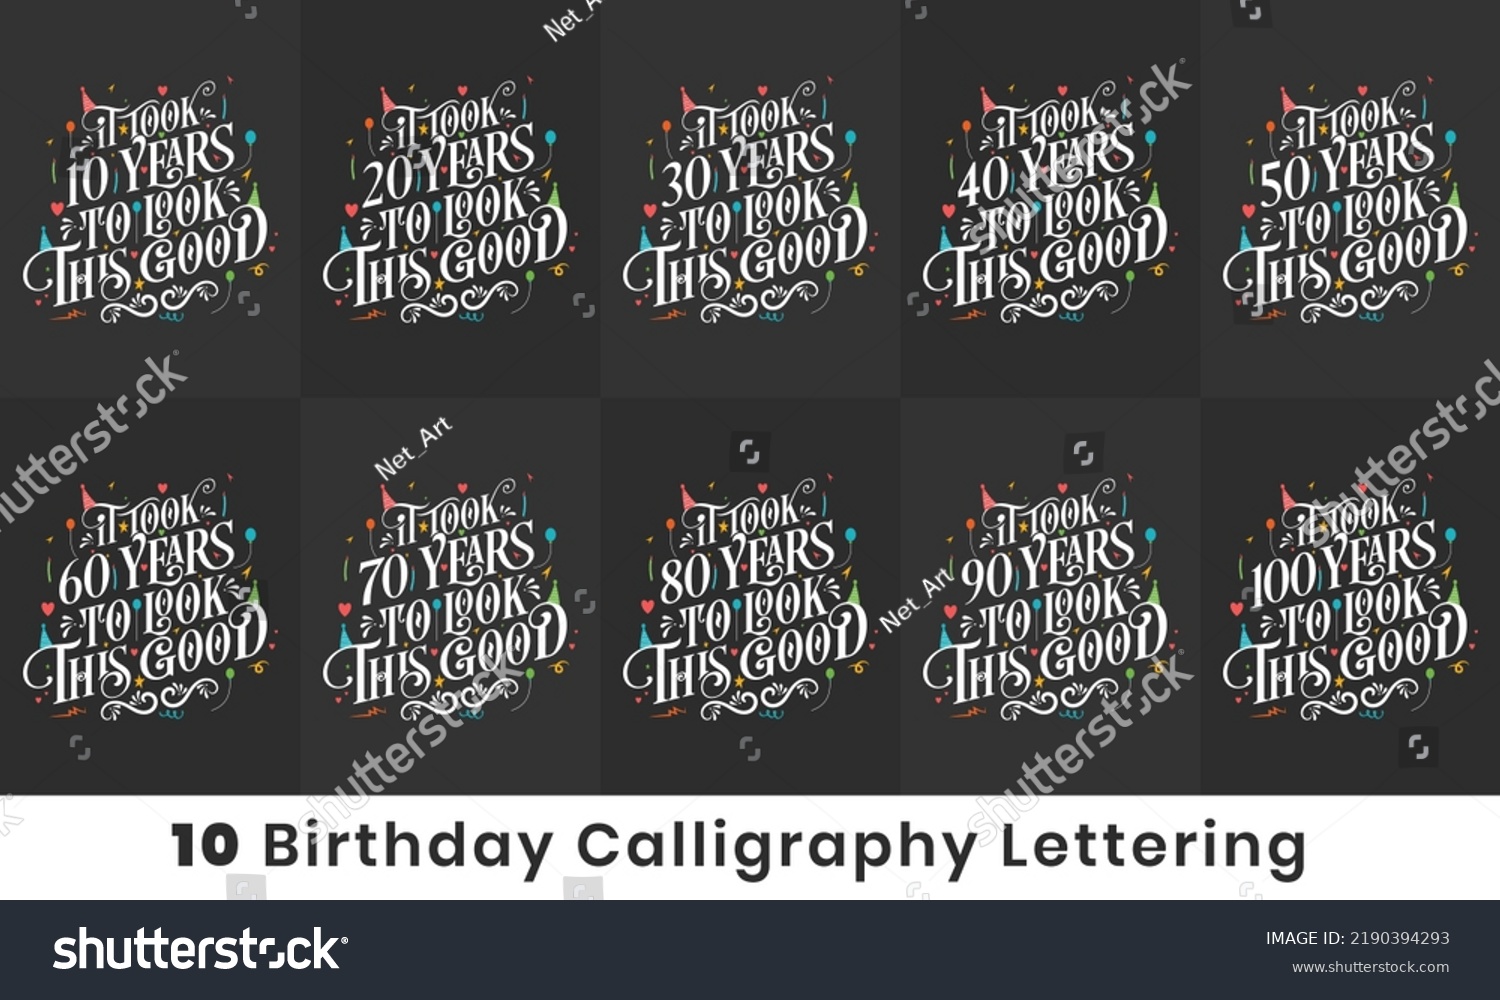 SVG of Birthday design bundle. 10 Birthday quote celebration Typography bundle. It took 10, 20, 30, 40, 50, 60, 70, 80, 90, 100 years to look this good svg